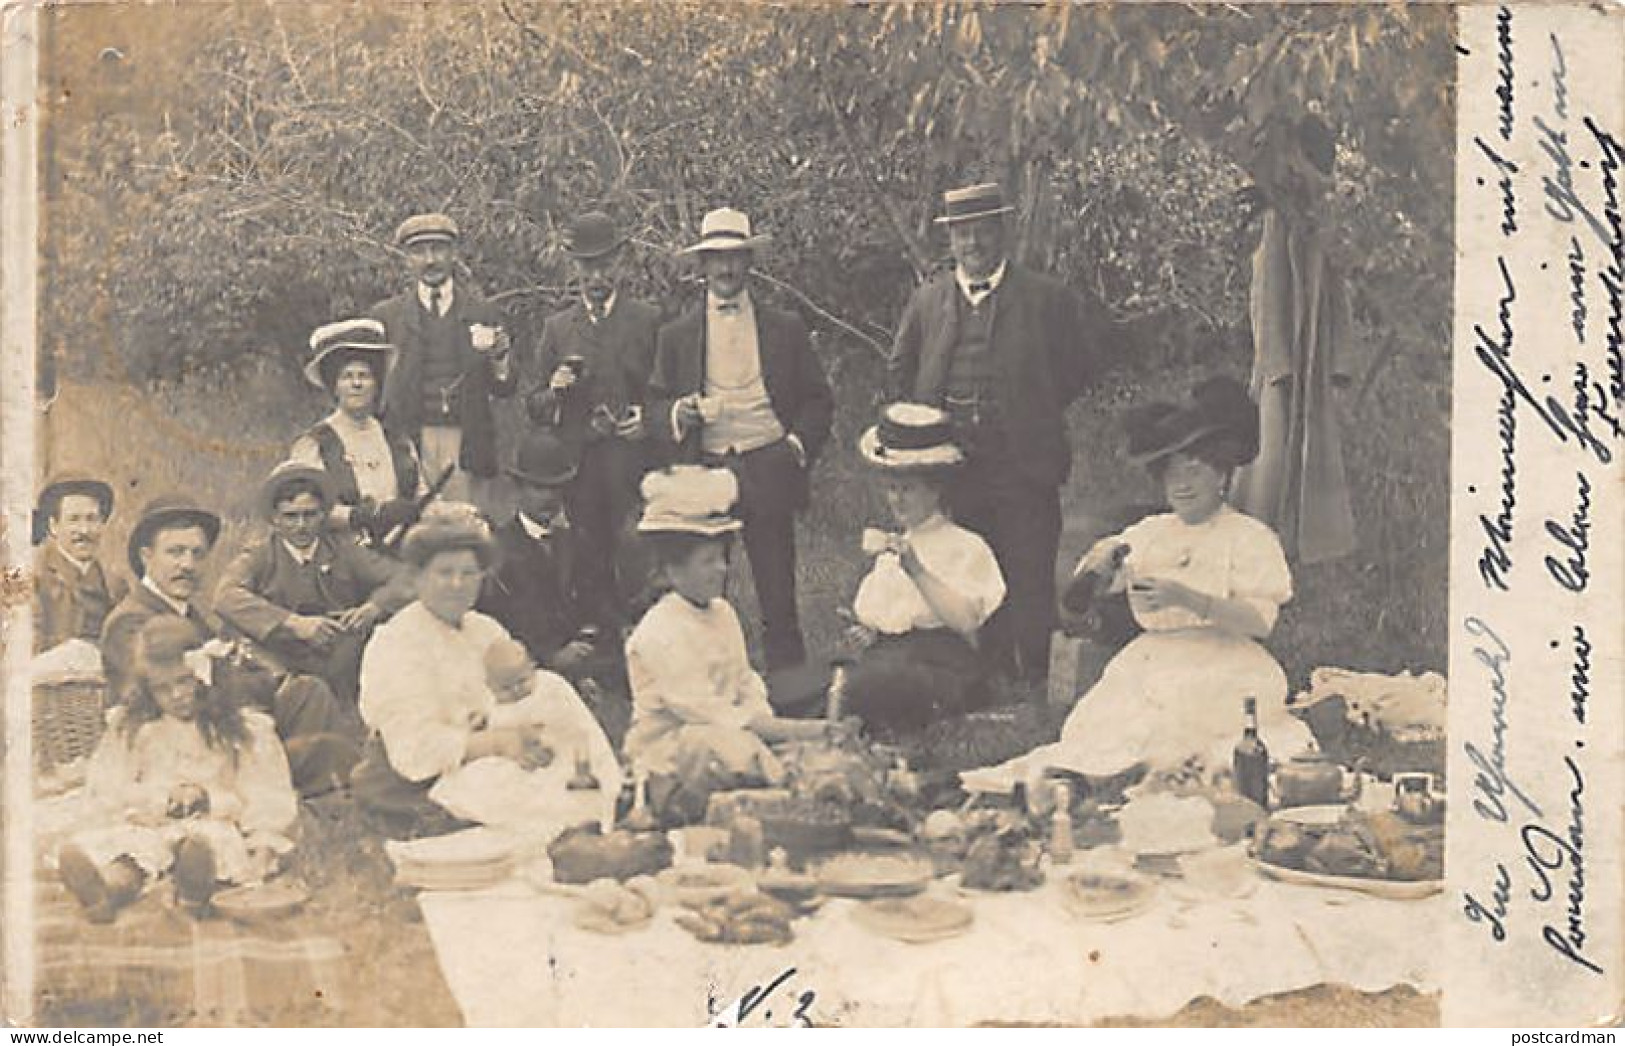 New Zealand - CHRISTCHURCH - Pic Nic Party - REAL PHOTO - Publ. Unknown  - New Zealand